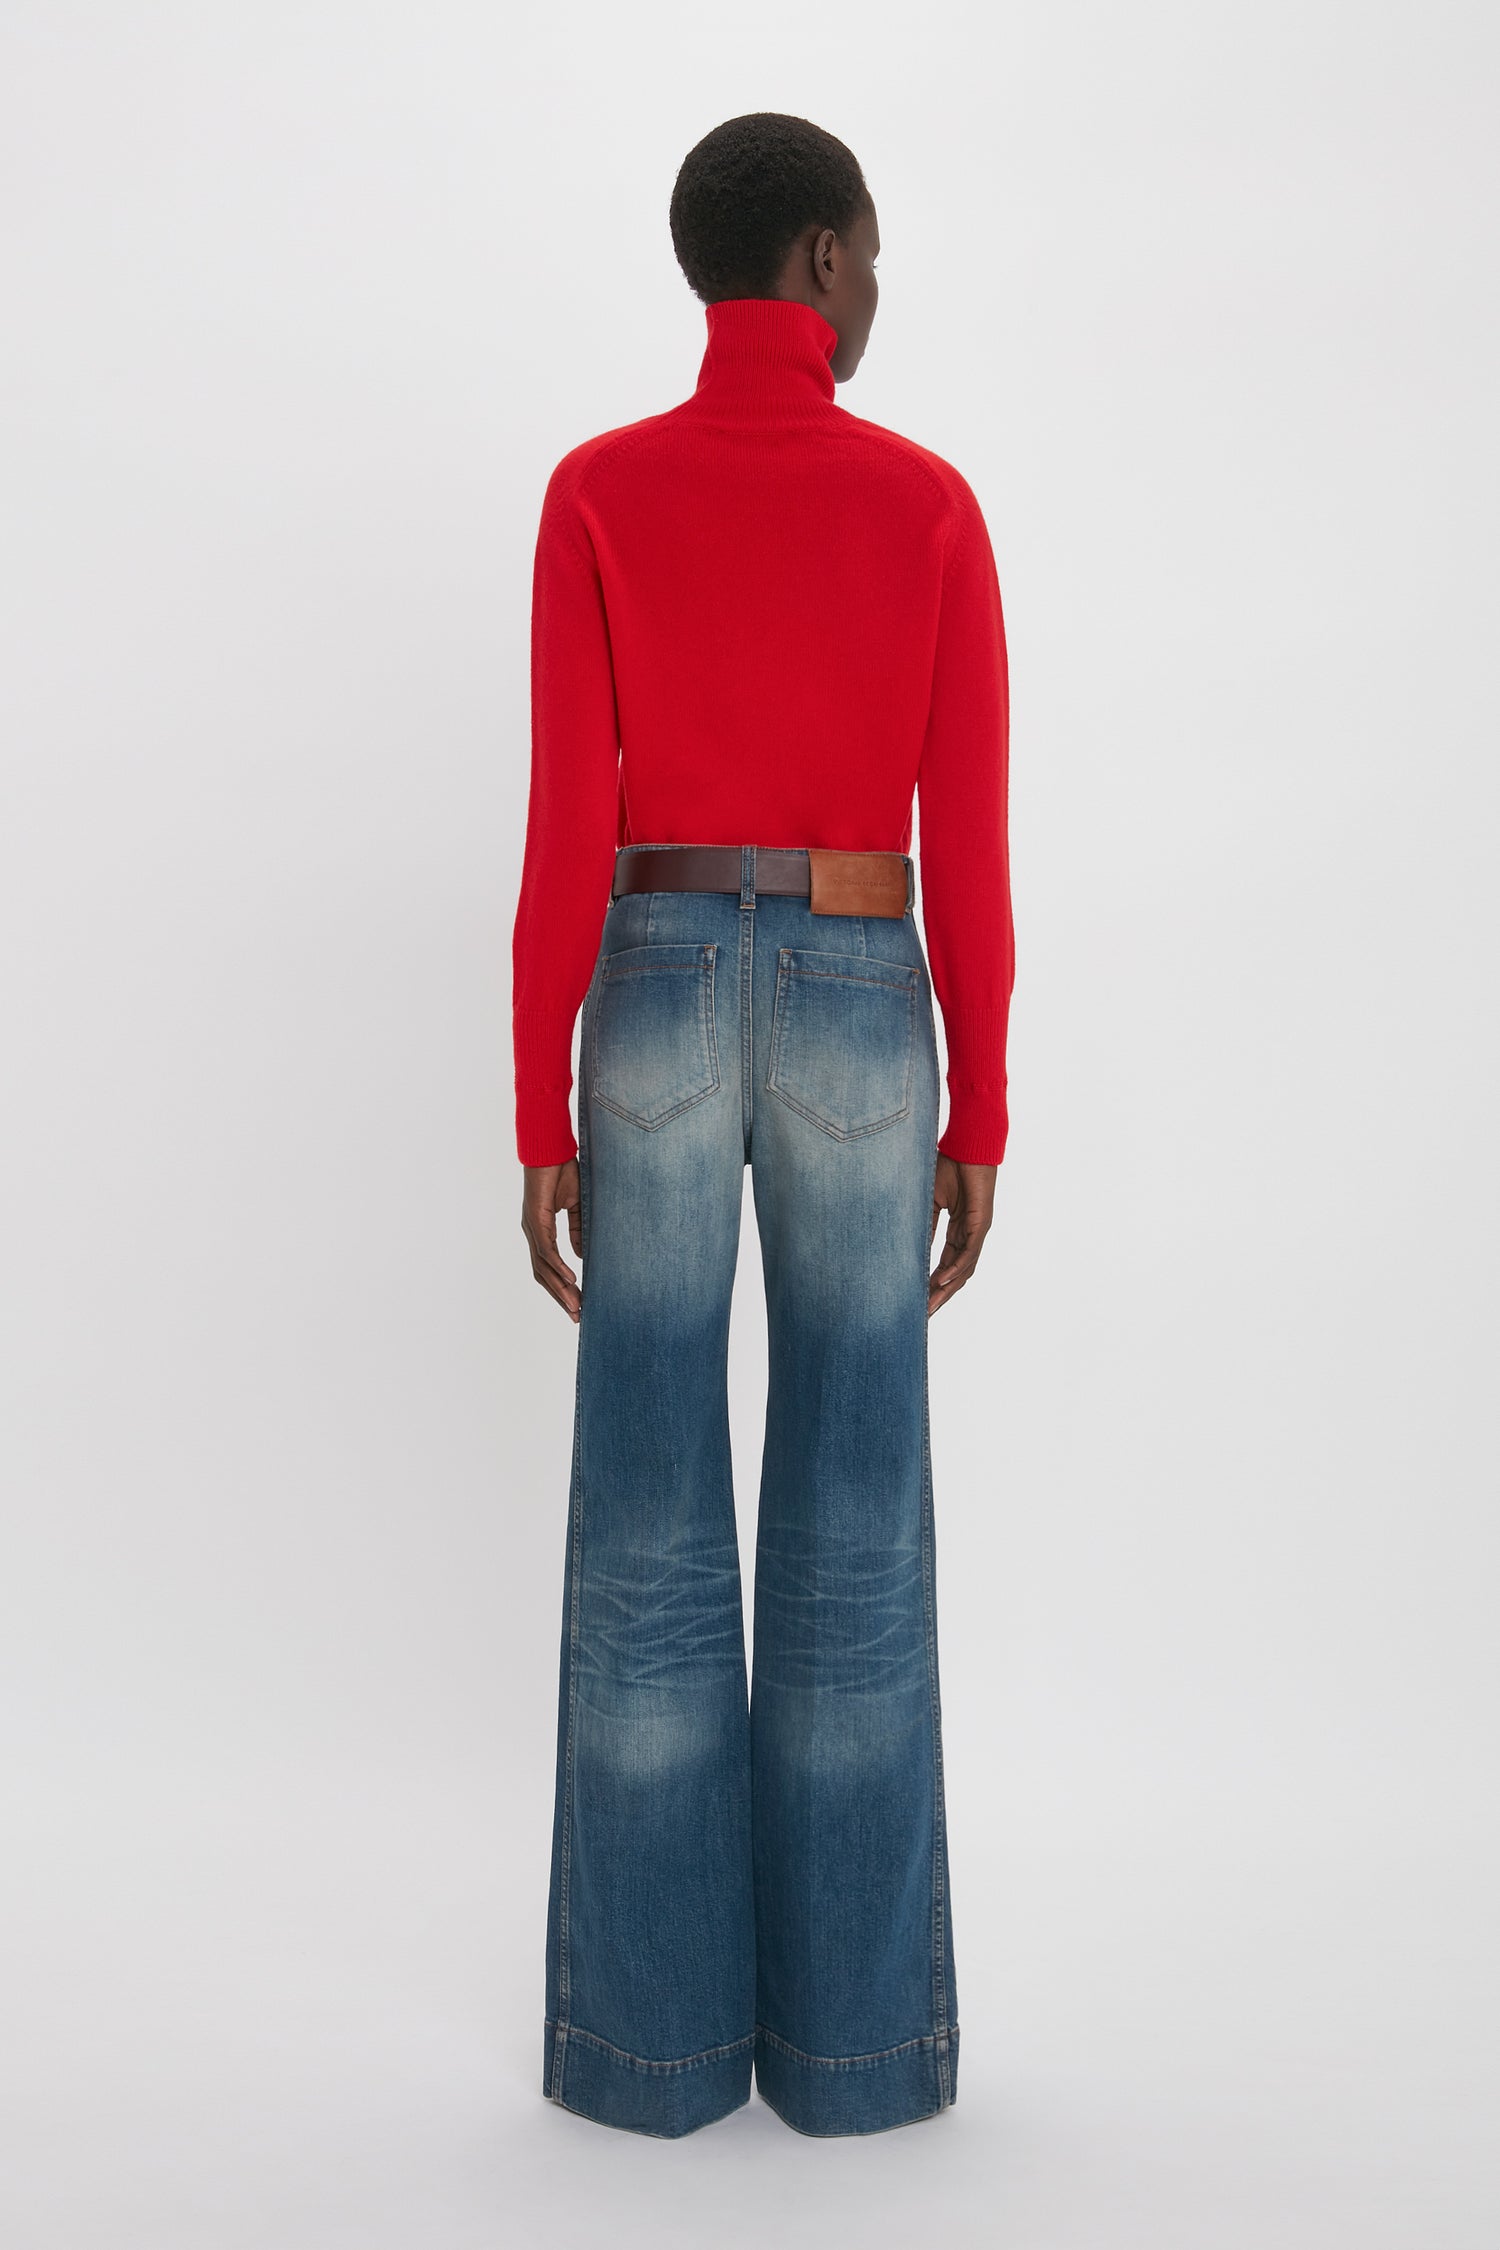 A woman stands with her back to the camera, wearing a red turtleneck and blue Victoria Beckham Alina Jean in Heavy Vintage Indigo Wash, against a plain white background.